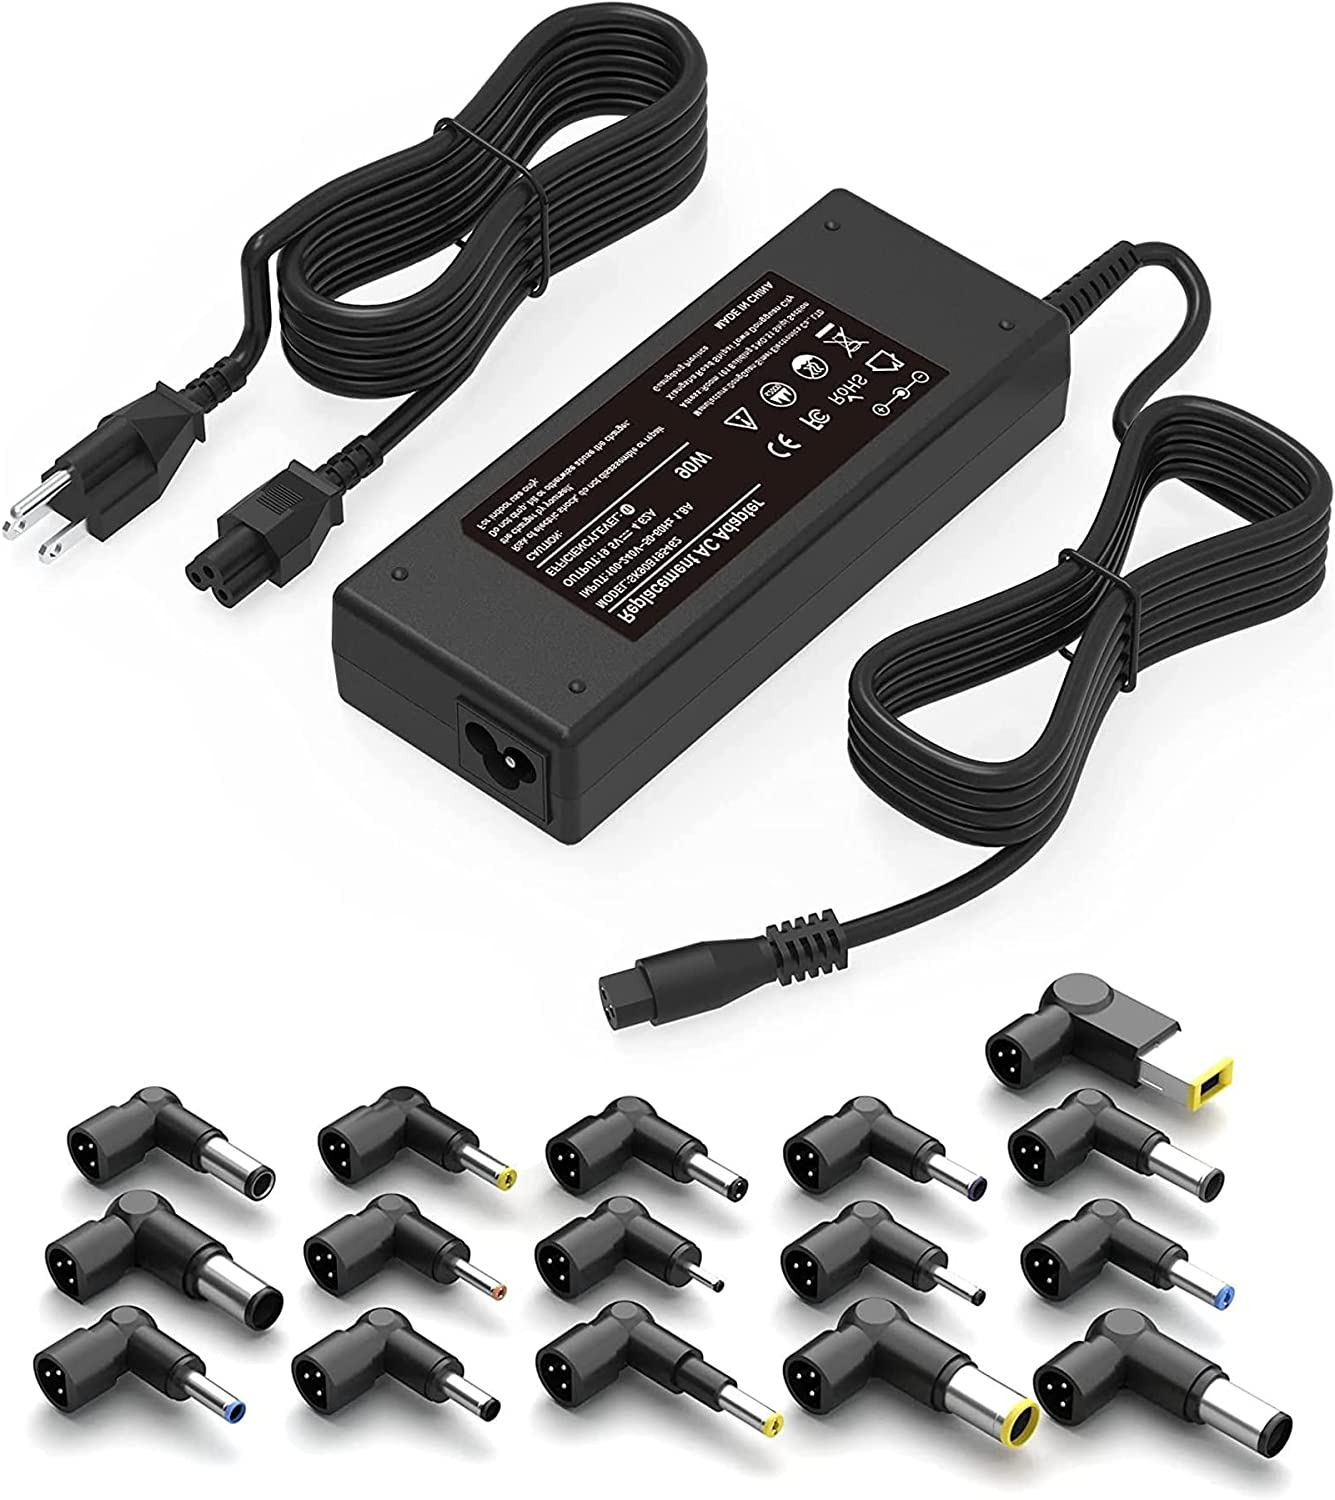 90W Universal AC Adapter Laptop Charger Replacement for Dell HP Acer Asus Lenovo